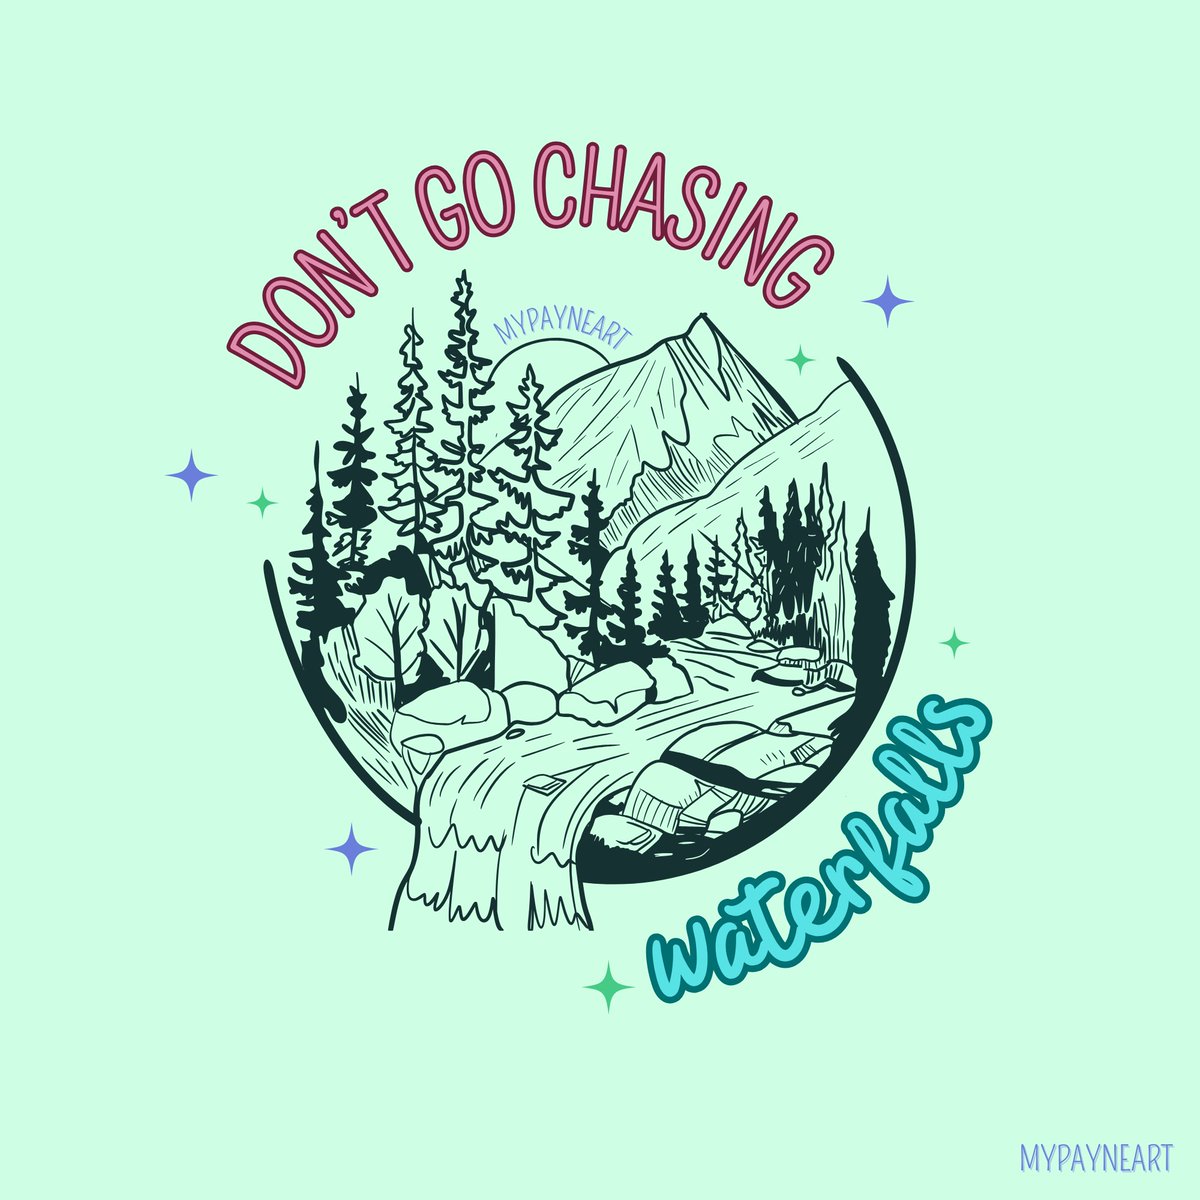 Don’t go chasing waterfalls 💧🎶
.
.
.
#TLC #waterfalls #graphicdesign #graphicartist #graphicdesignercommunity #graphicdesigner #music #artist #art #graphicart #girlartist #designer #illustrations #typography #typographyinspo #type #graphicdesigninspo #retroish #designs